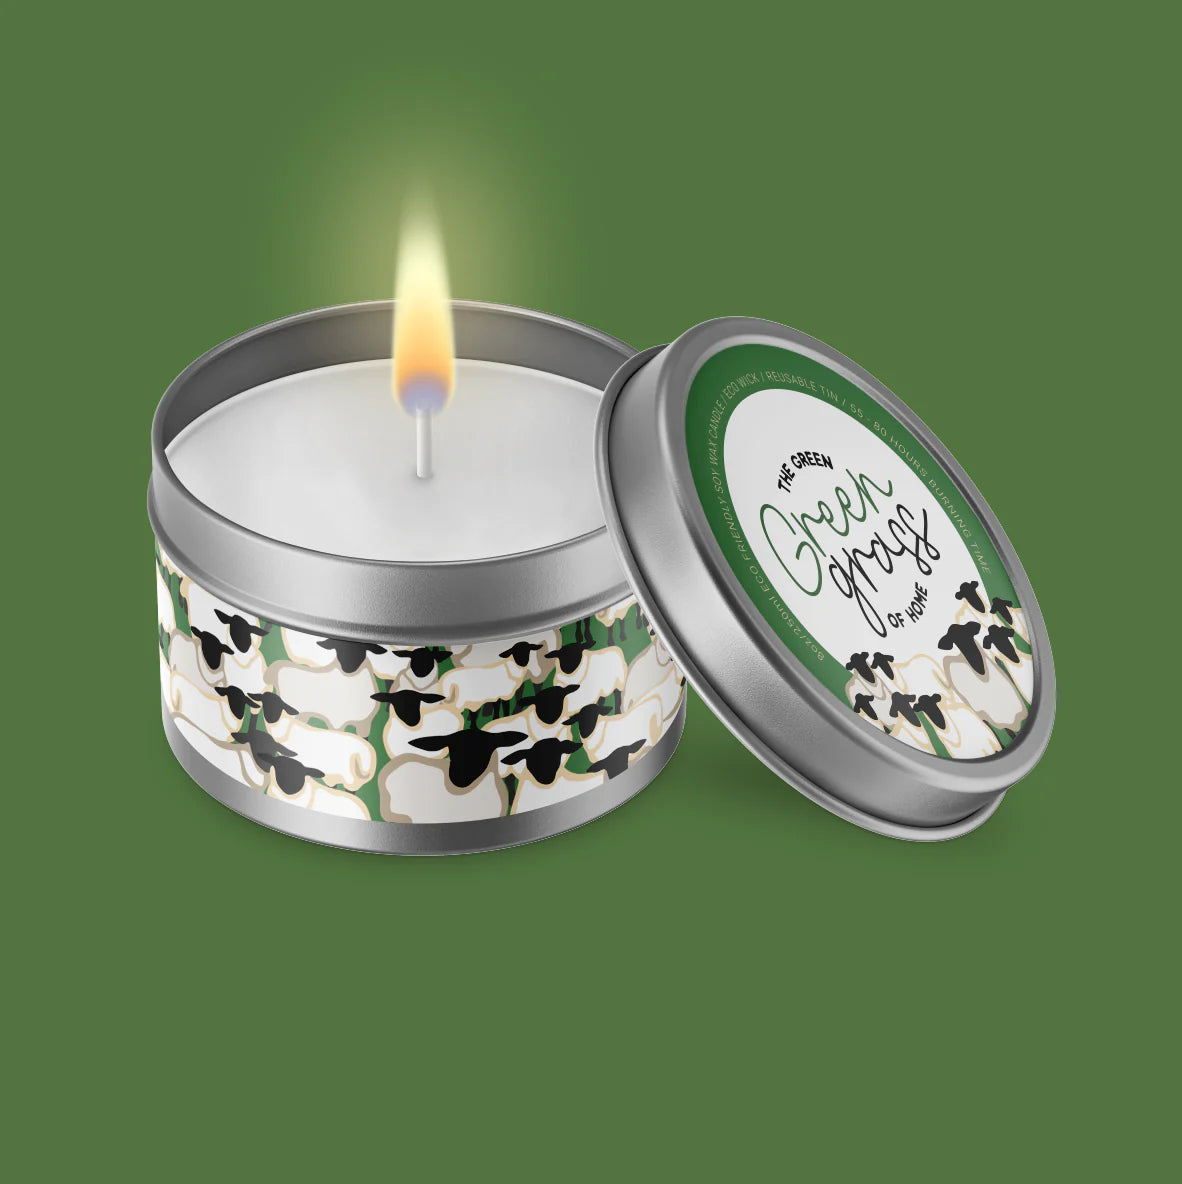 THE GREEN GREEN GRASS OF HOME CANDLE